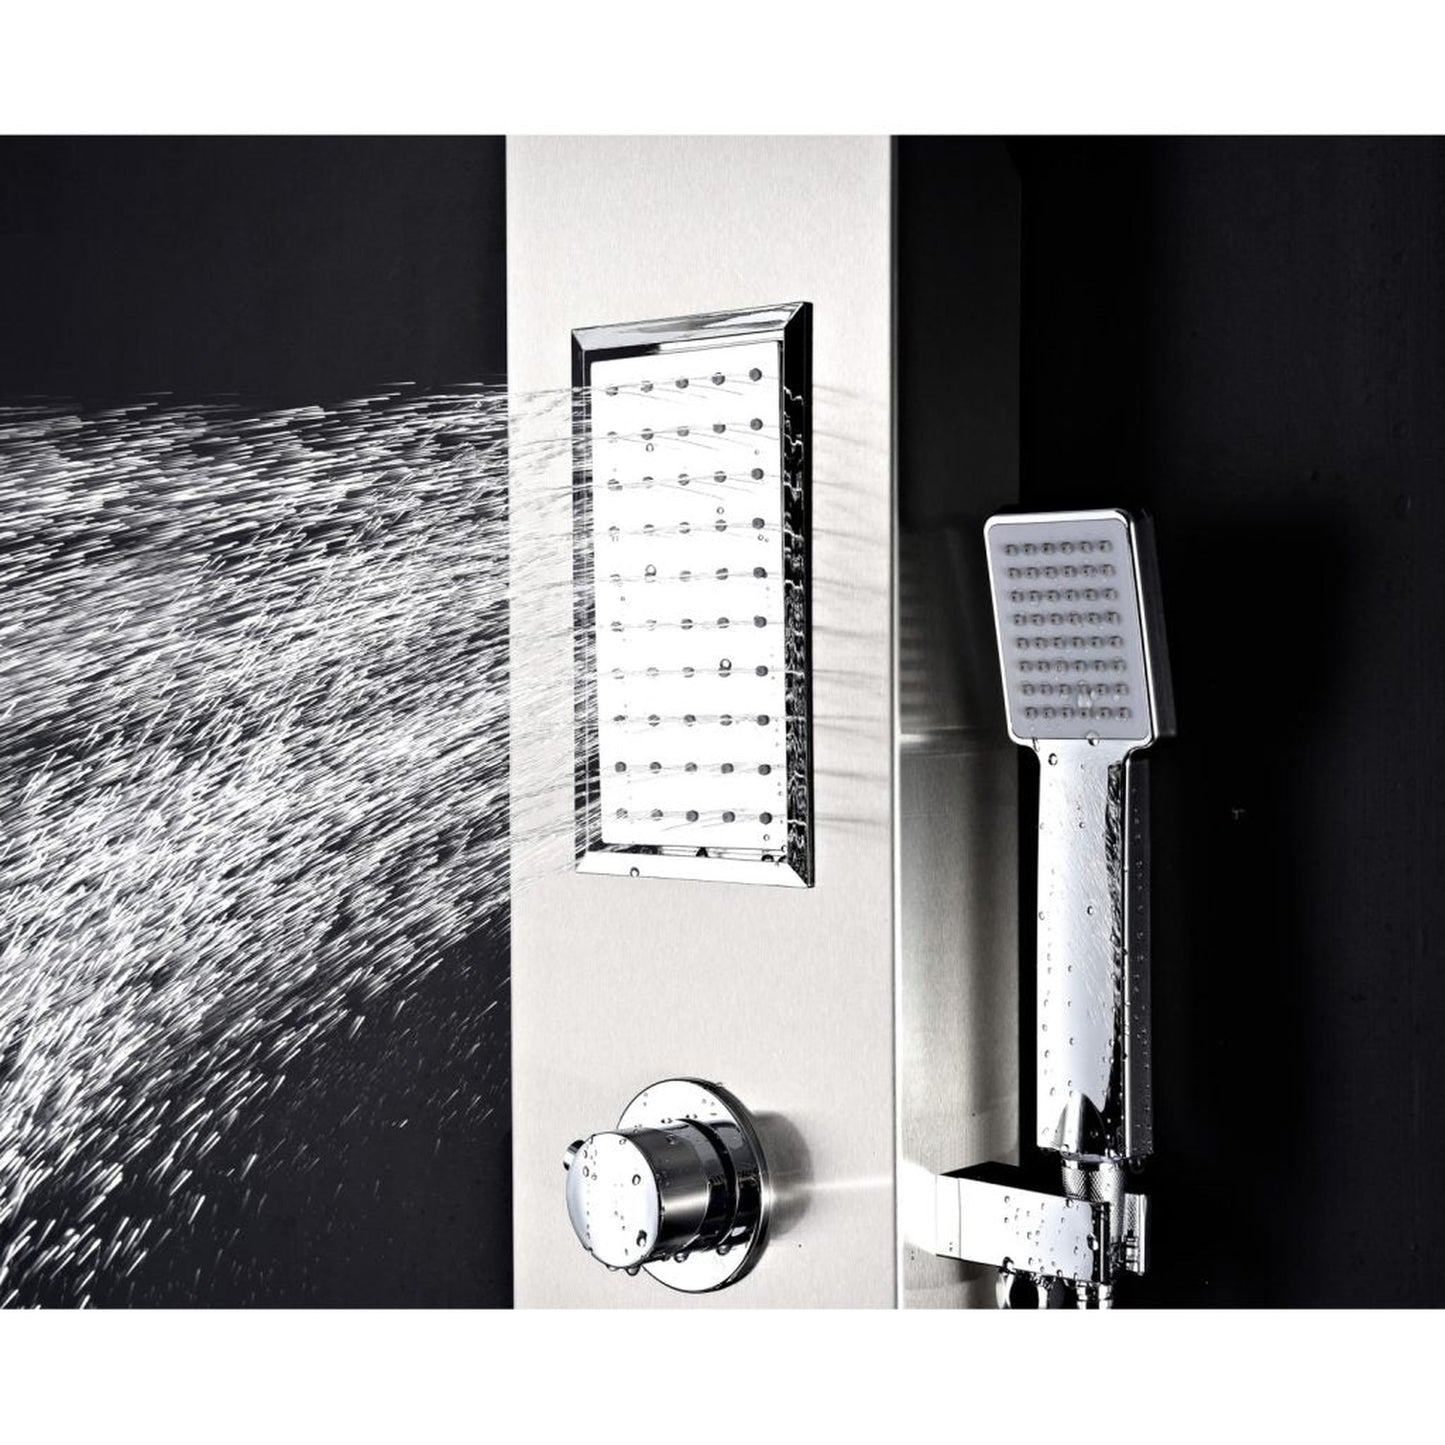 ANZZI Mesmer Series 58" Brushed Stainless Steel 2-Jetted Full Body Shower Panel With Heavy Rain Shower Head and Euro-Grip Hand Sprayer